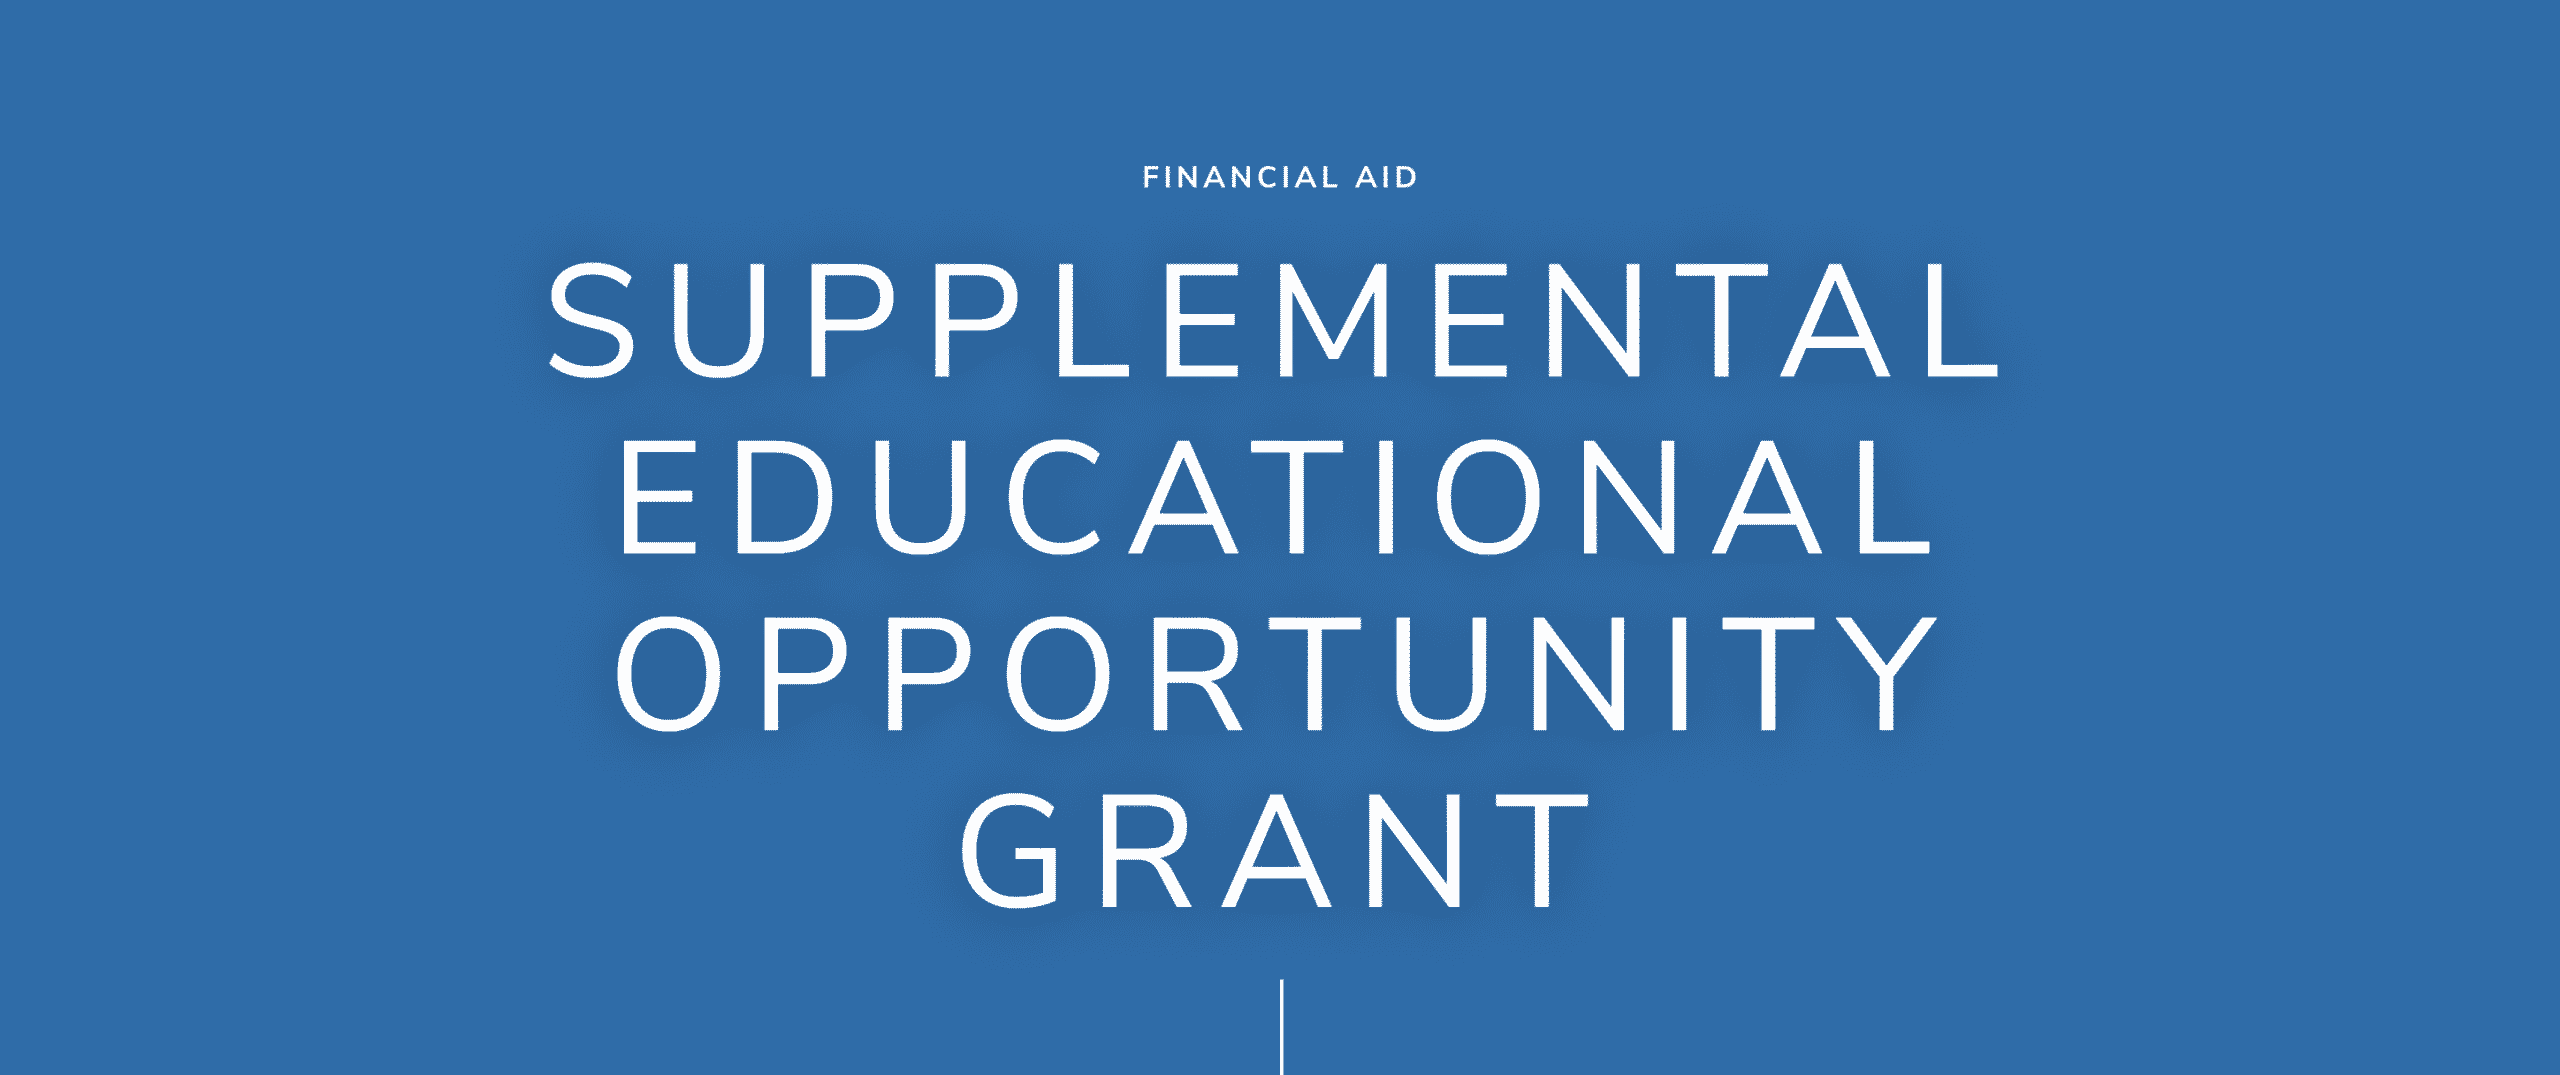 What makes Federal SEOG Grant Different?